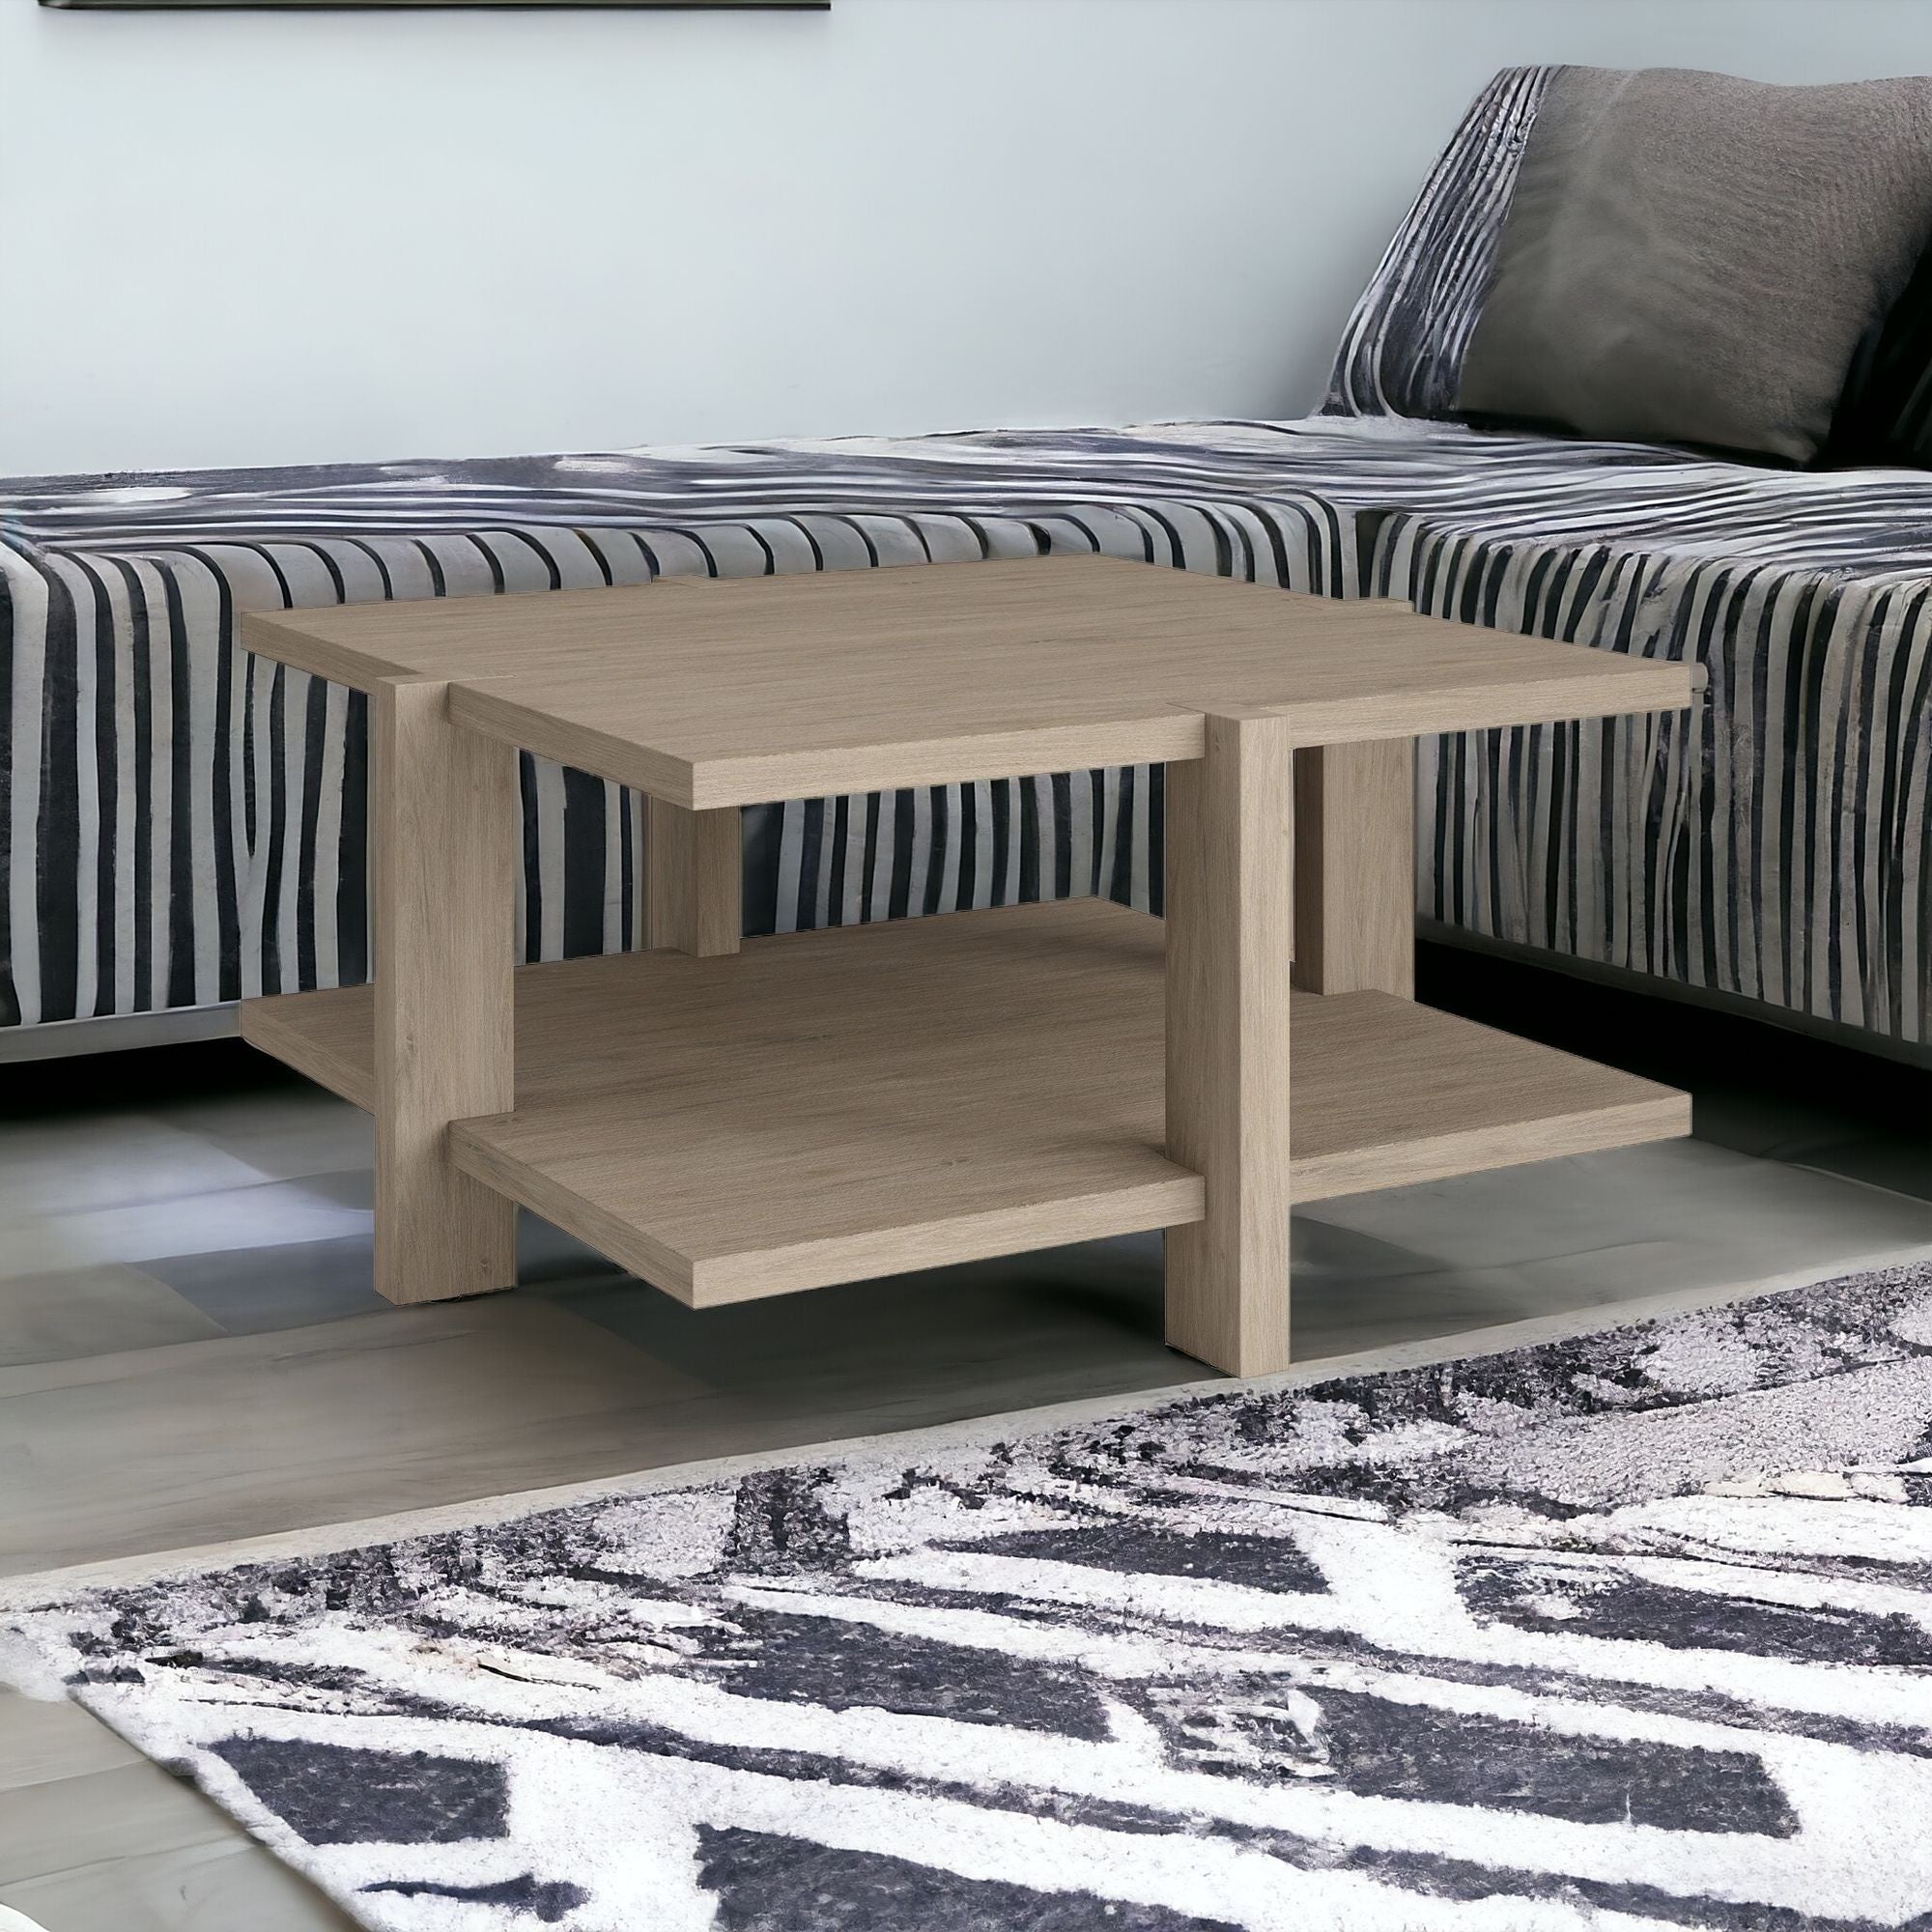 35" Gray Square Coffee Table With Shelf